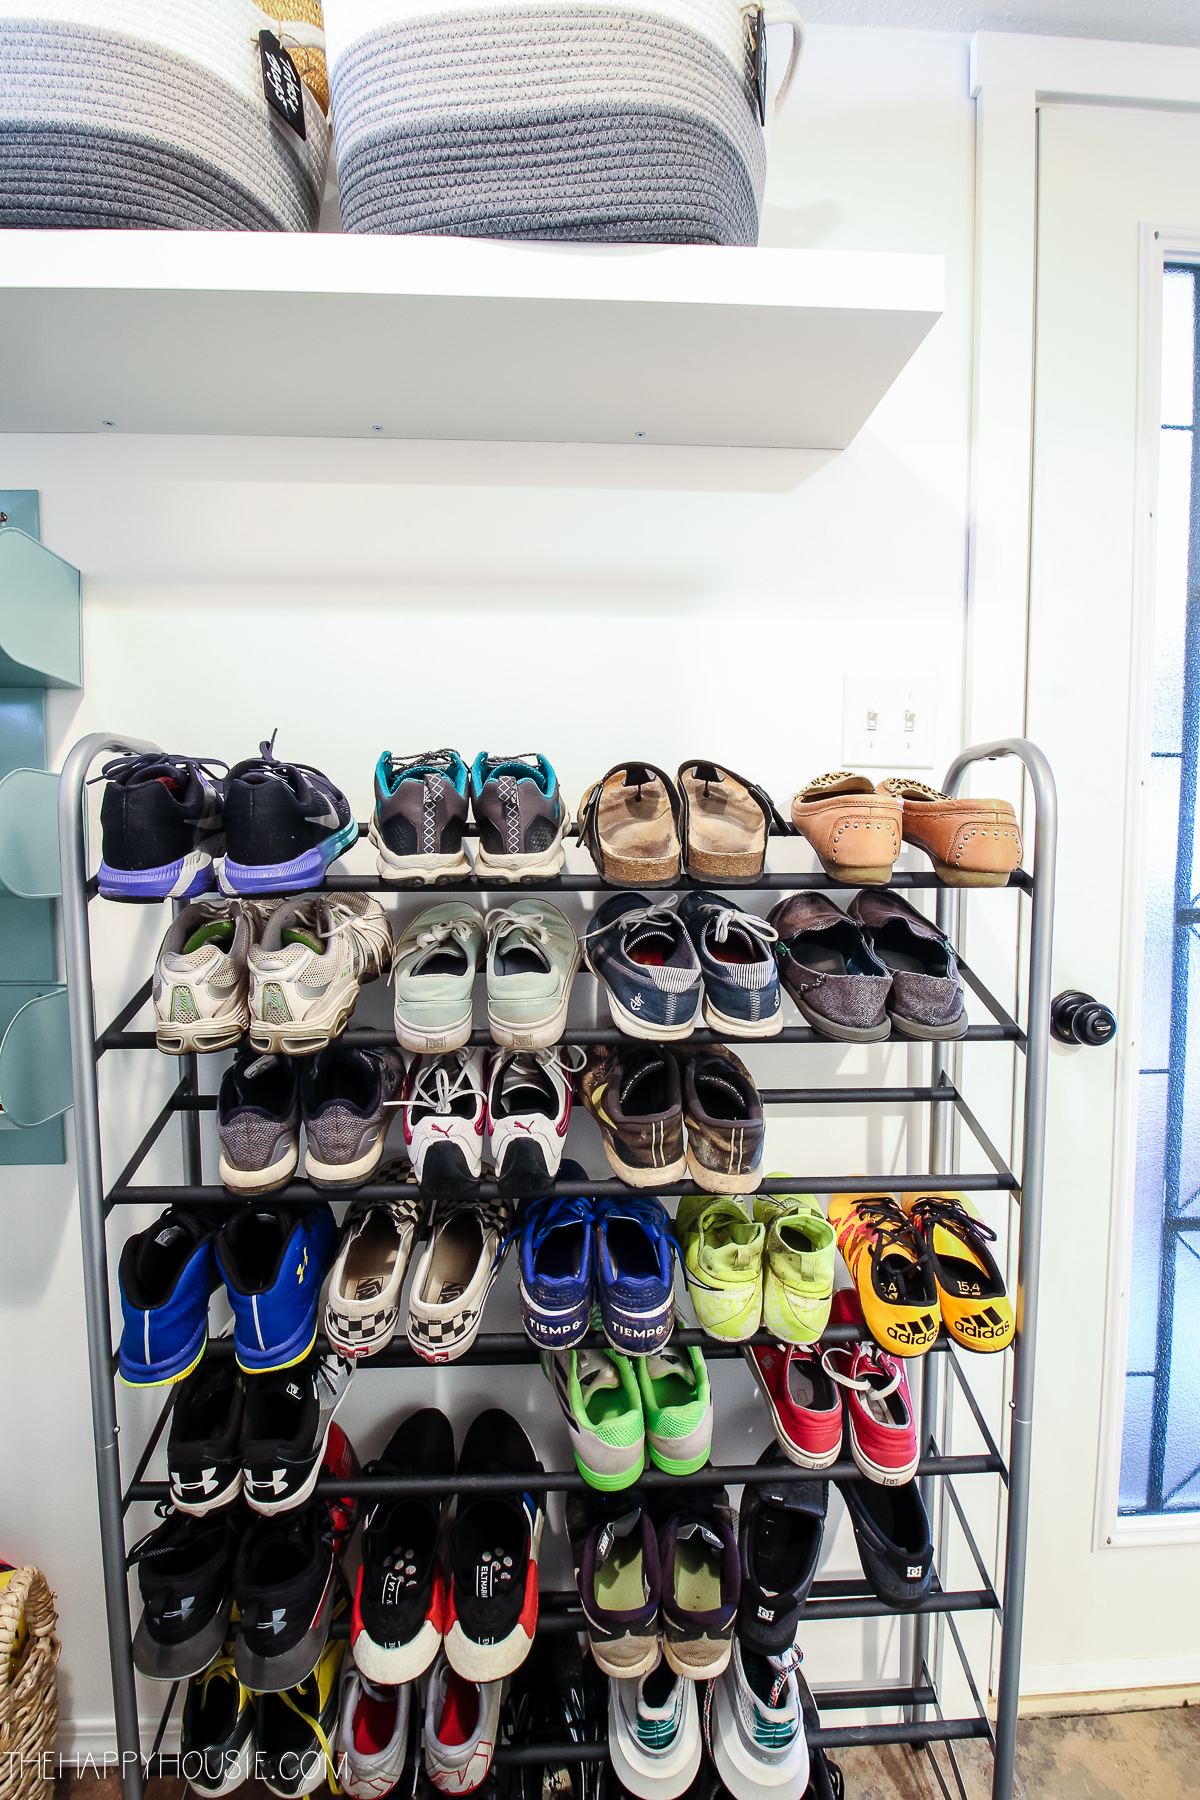 All the shoes lined up on the rack.